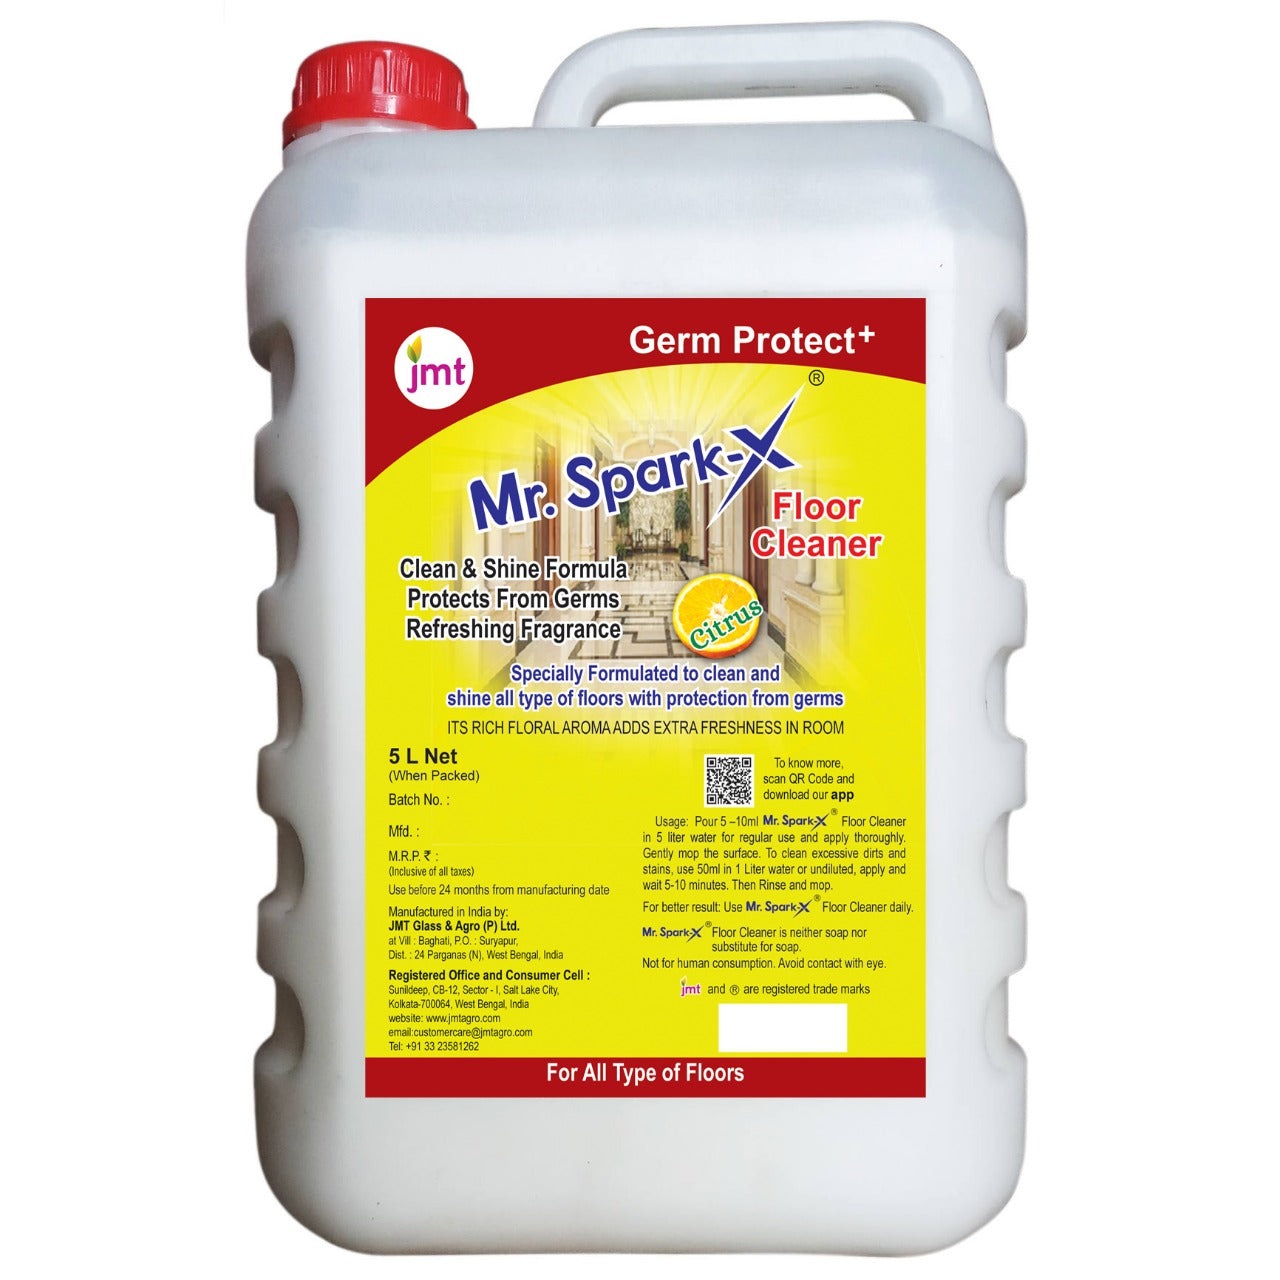 5L Mr Spark-X Floor Cleaner with Germprotect+ Technology